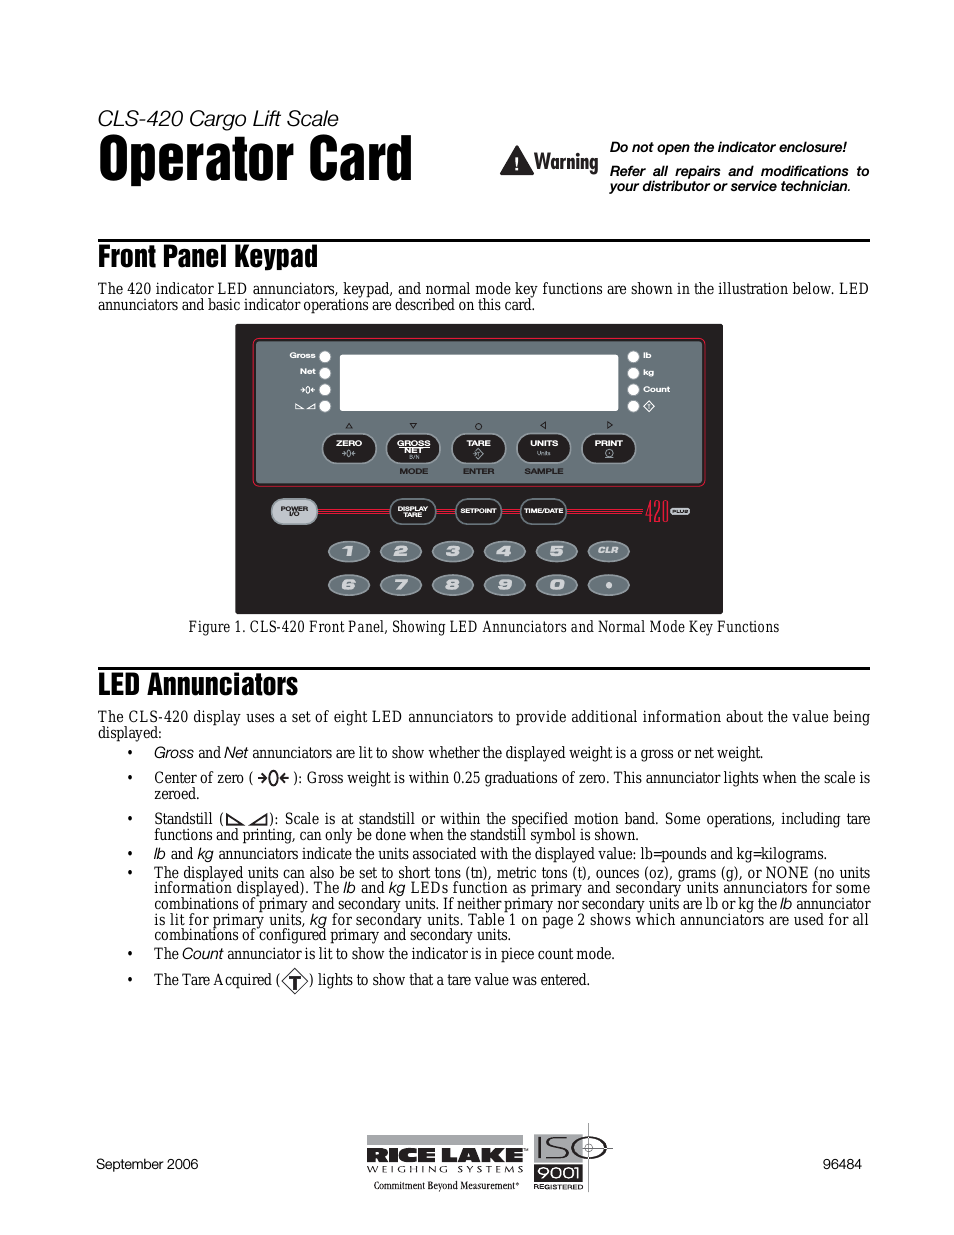 CLS-420 Cargo Lift Scale Operator Card